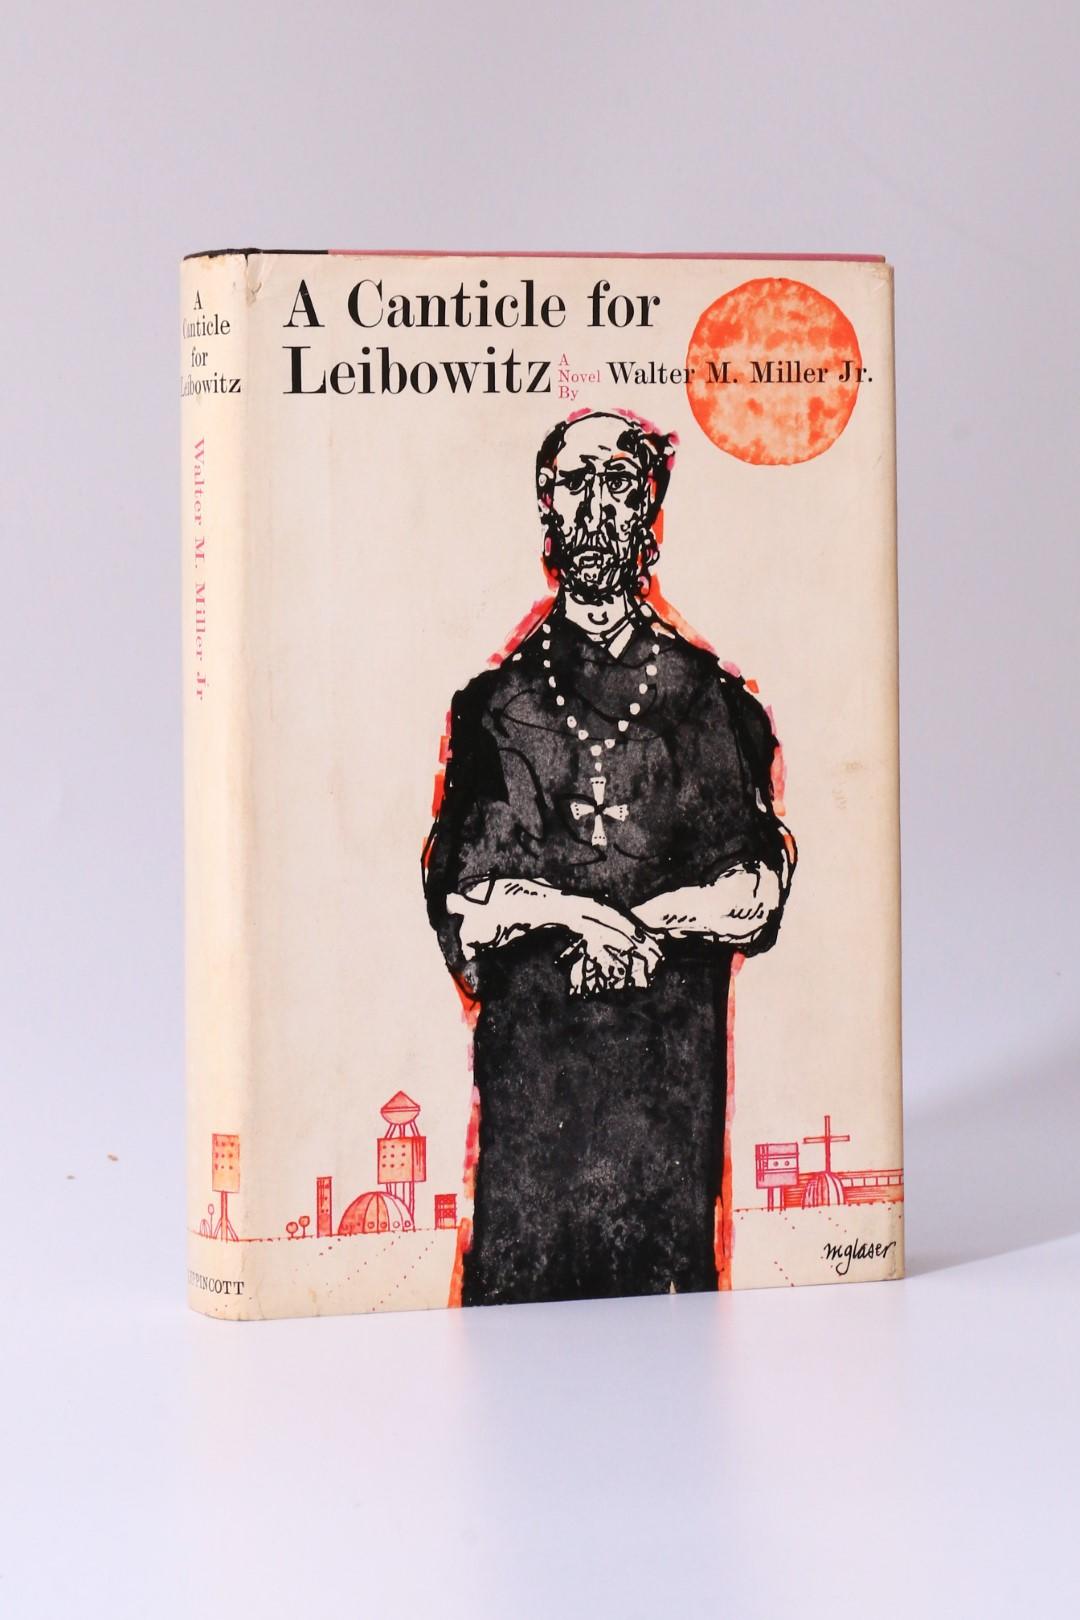 Walter M. Miller - A Canticle for Leibowitz - Lippincott, 1959, First Edition.